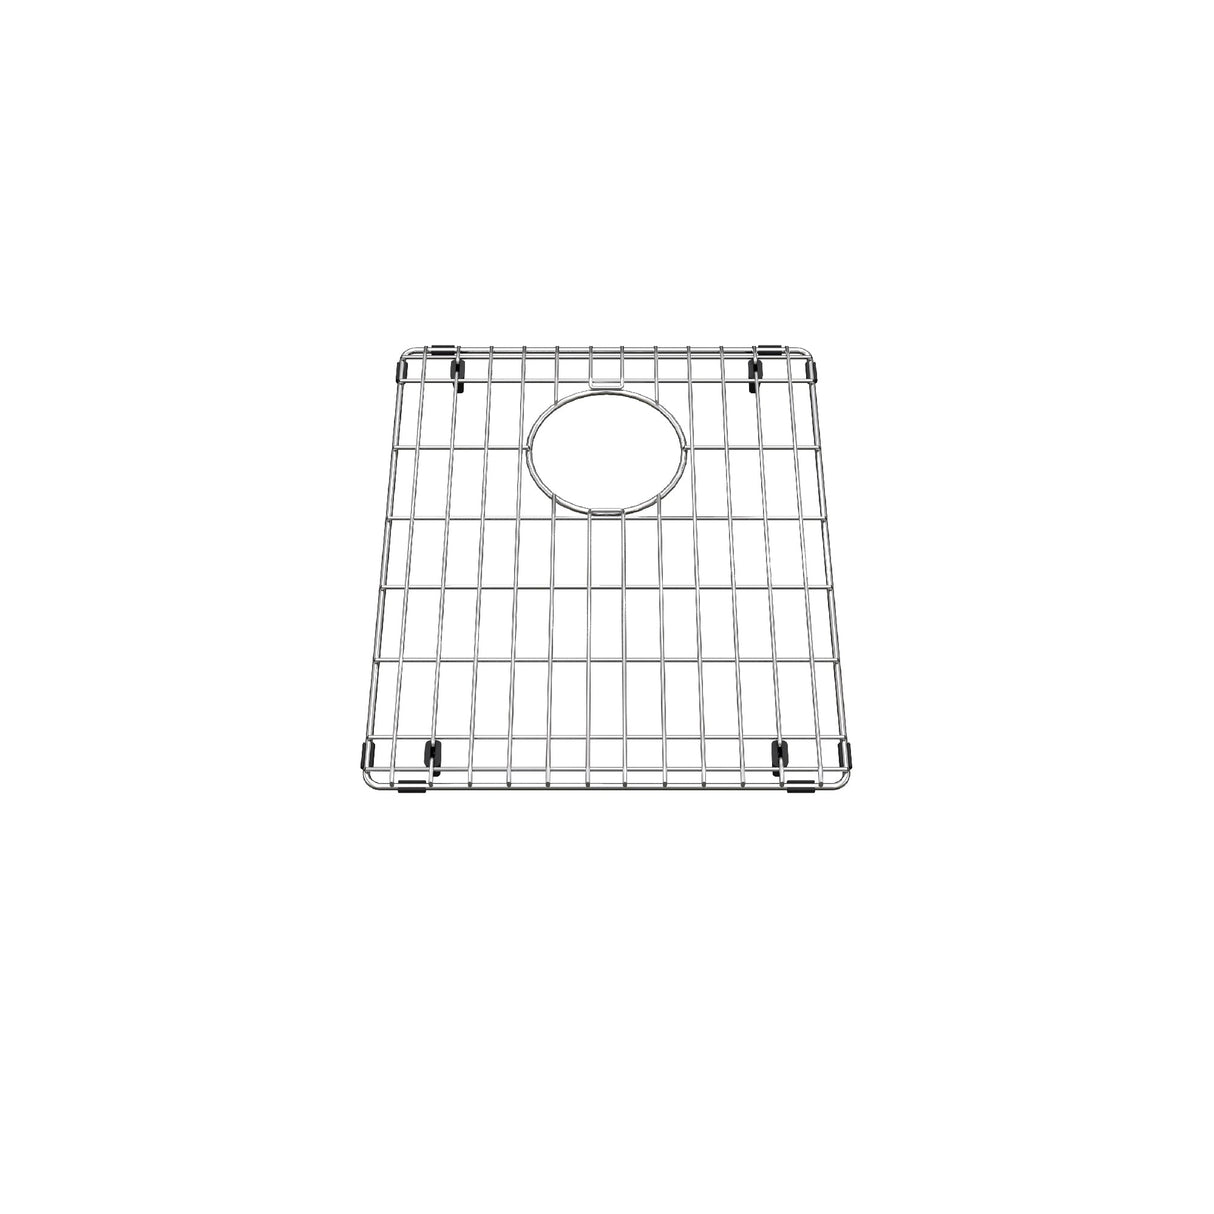 KINDRED BG514S Stainless Steel Bottom Grid for Sink 15-in x 12.5-in In Stainless Steel